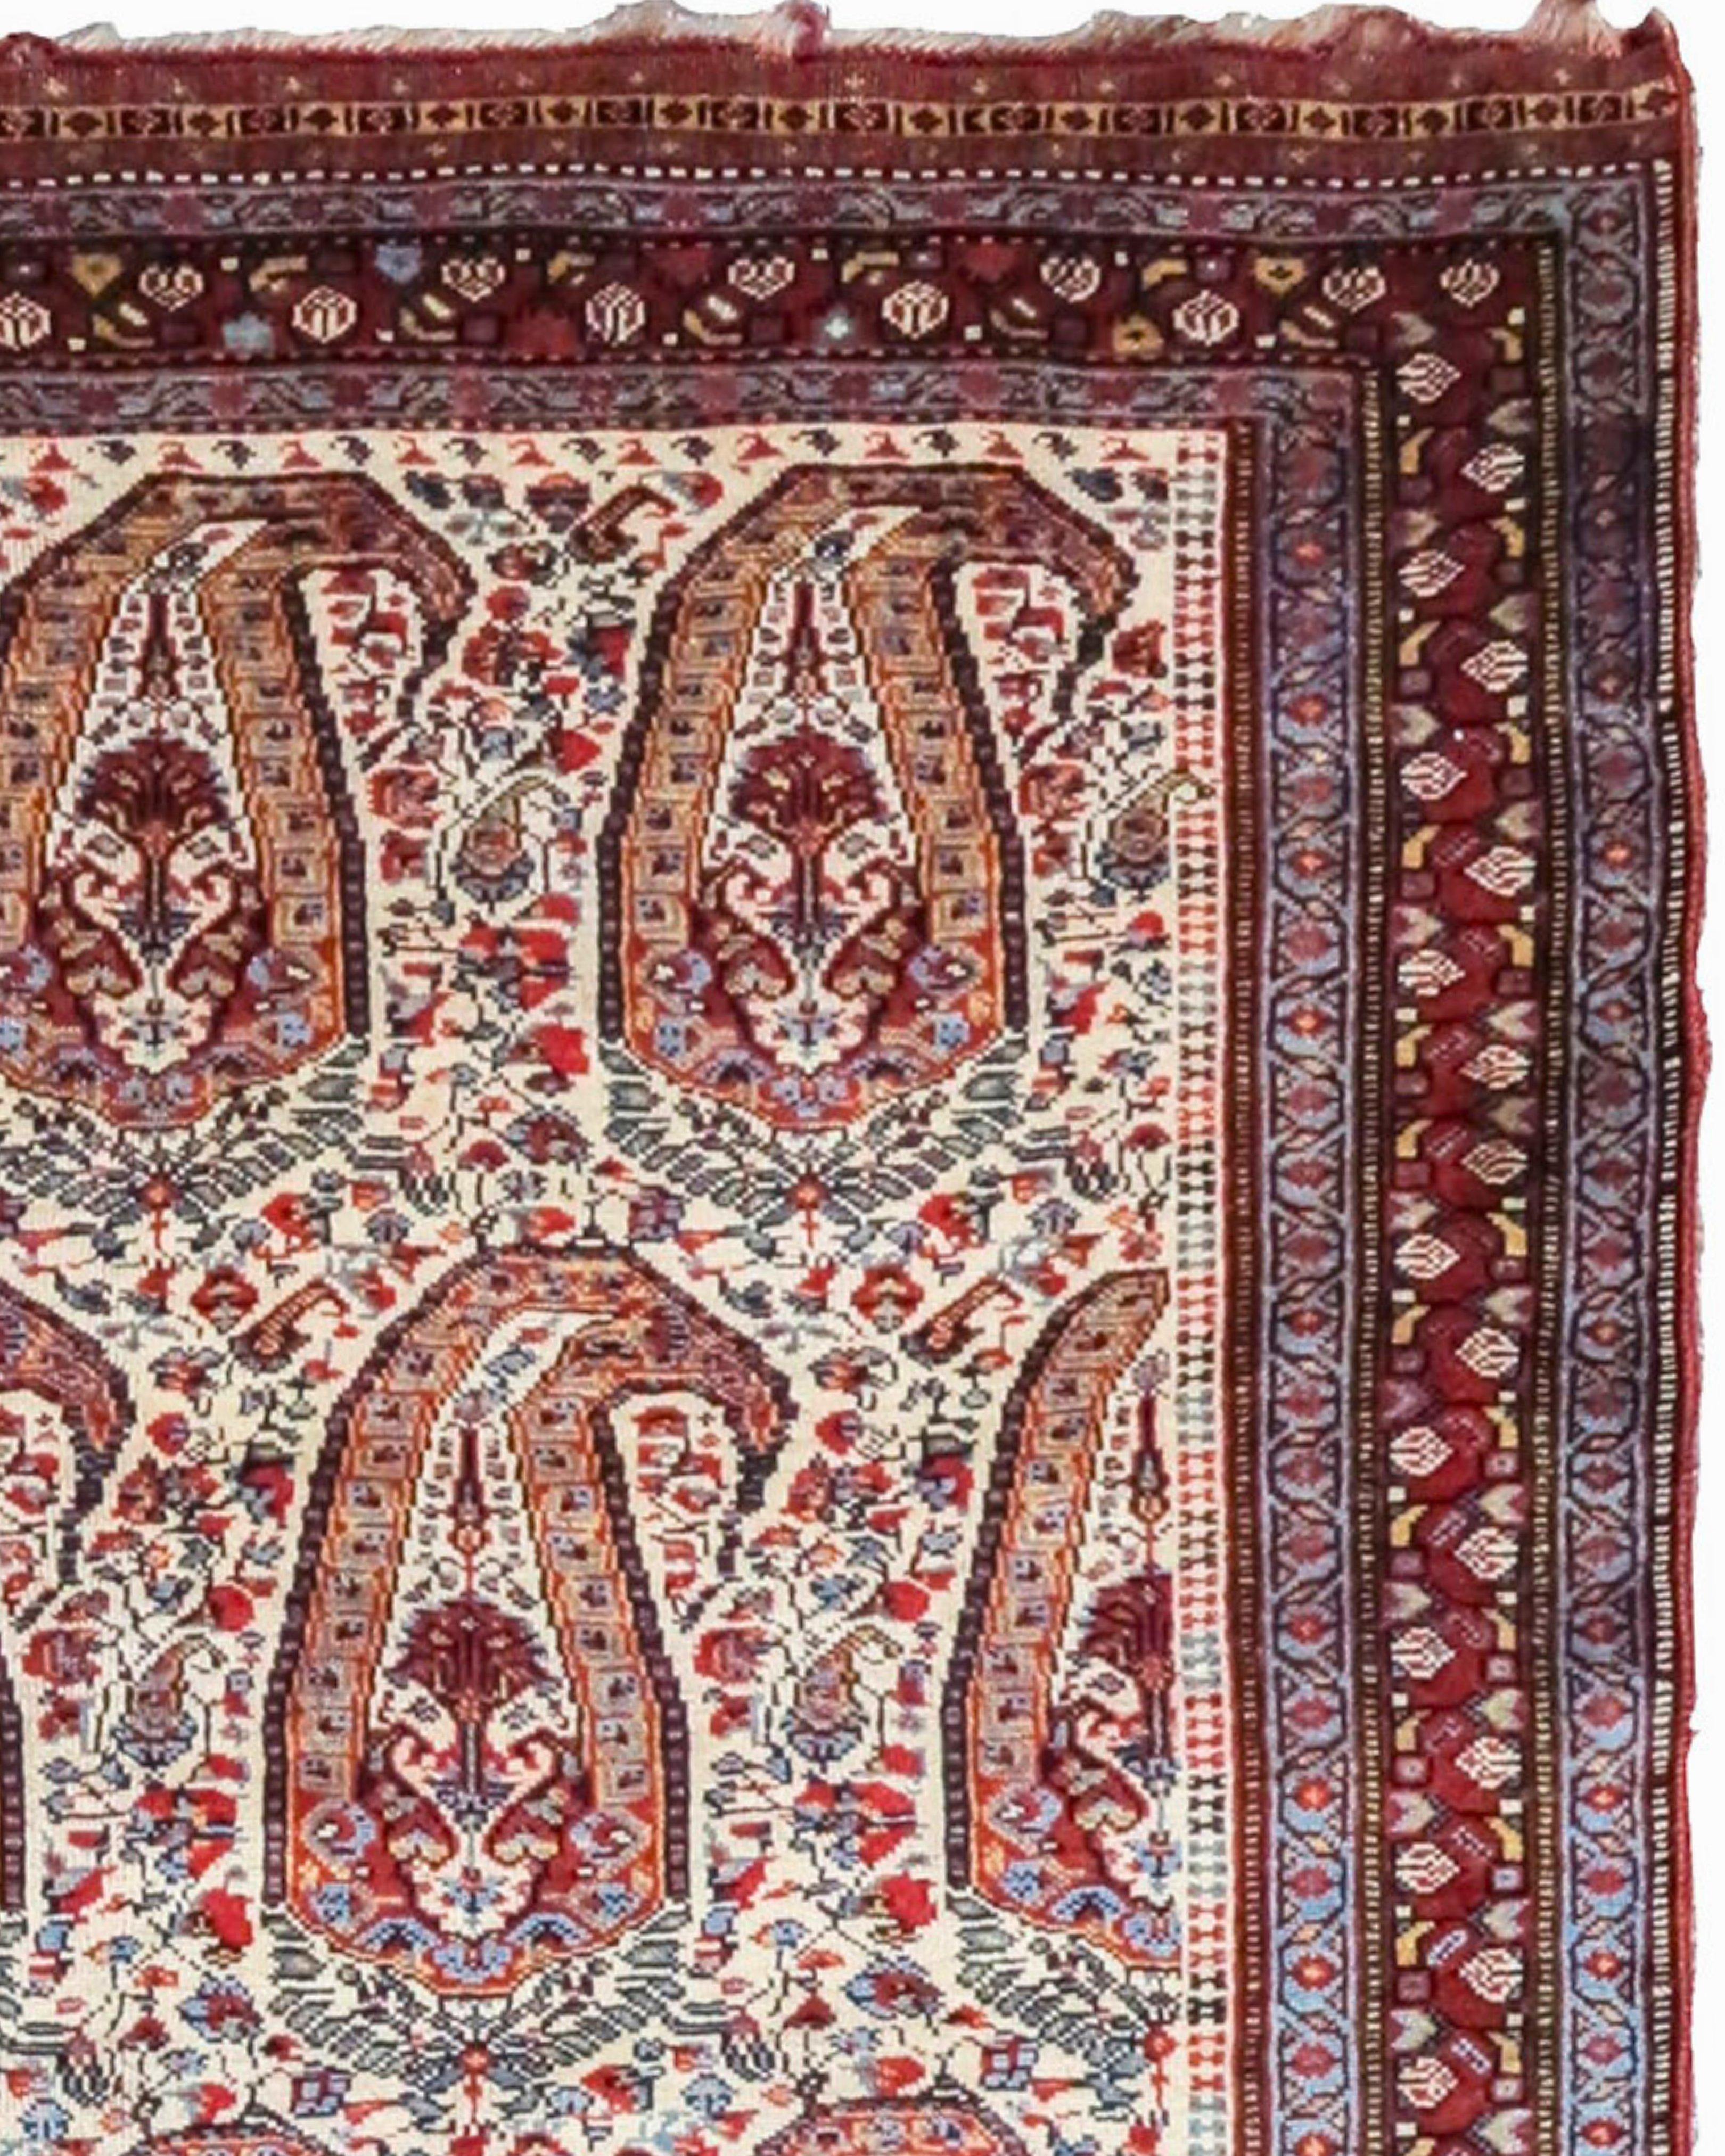 Antique Khamseh Rug, Late 19th Century

Additional Information:
Dimensions: 4'3